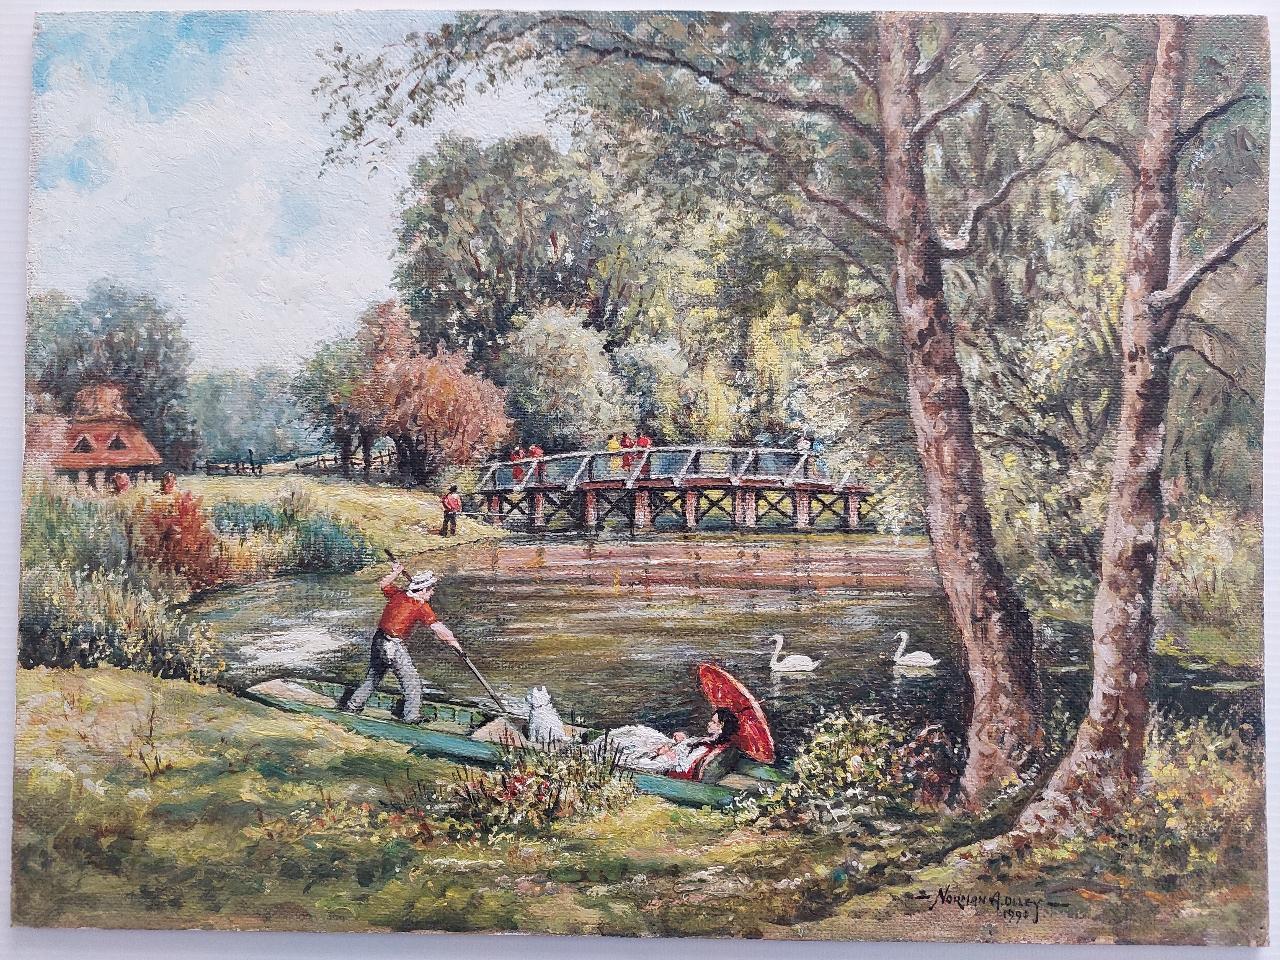 Artist/ School: Norman A. Olley ( British, 20th Century, 1908-1996), dated 1991, signed to the front and inscribed verso

Title - On the Banks of the Ember - East Molesey Surrey 
Charming English summer scene of a gentleman in a river punt with